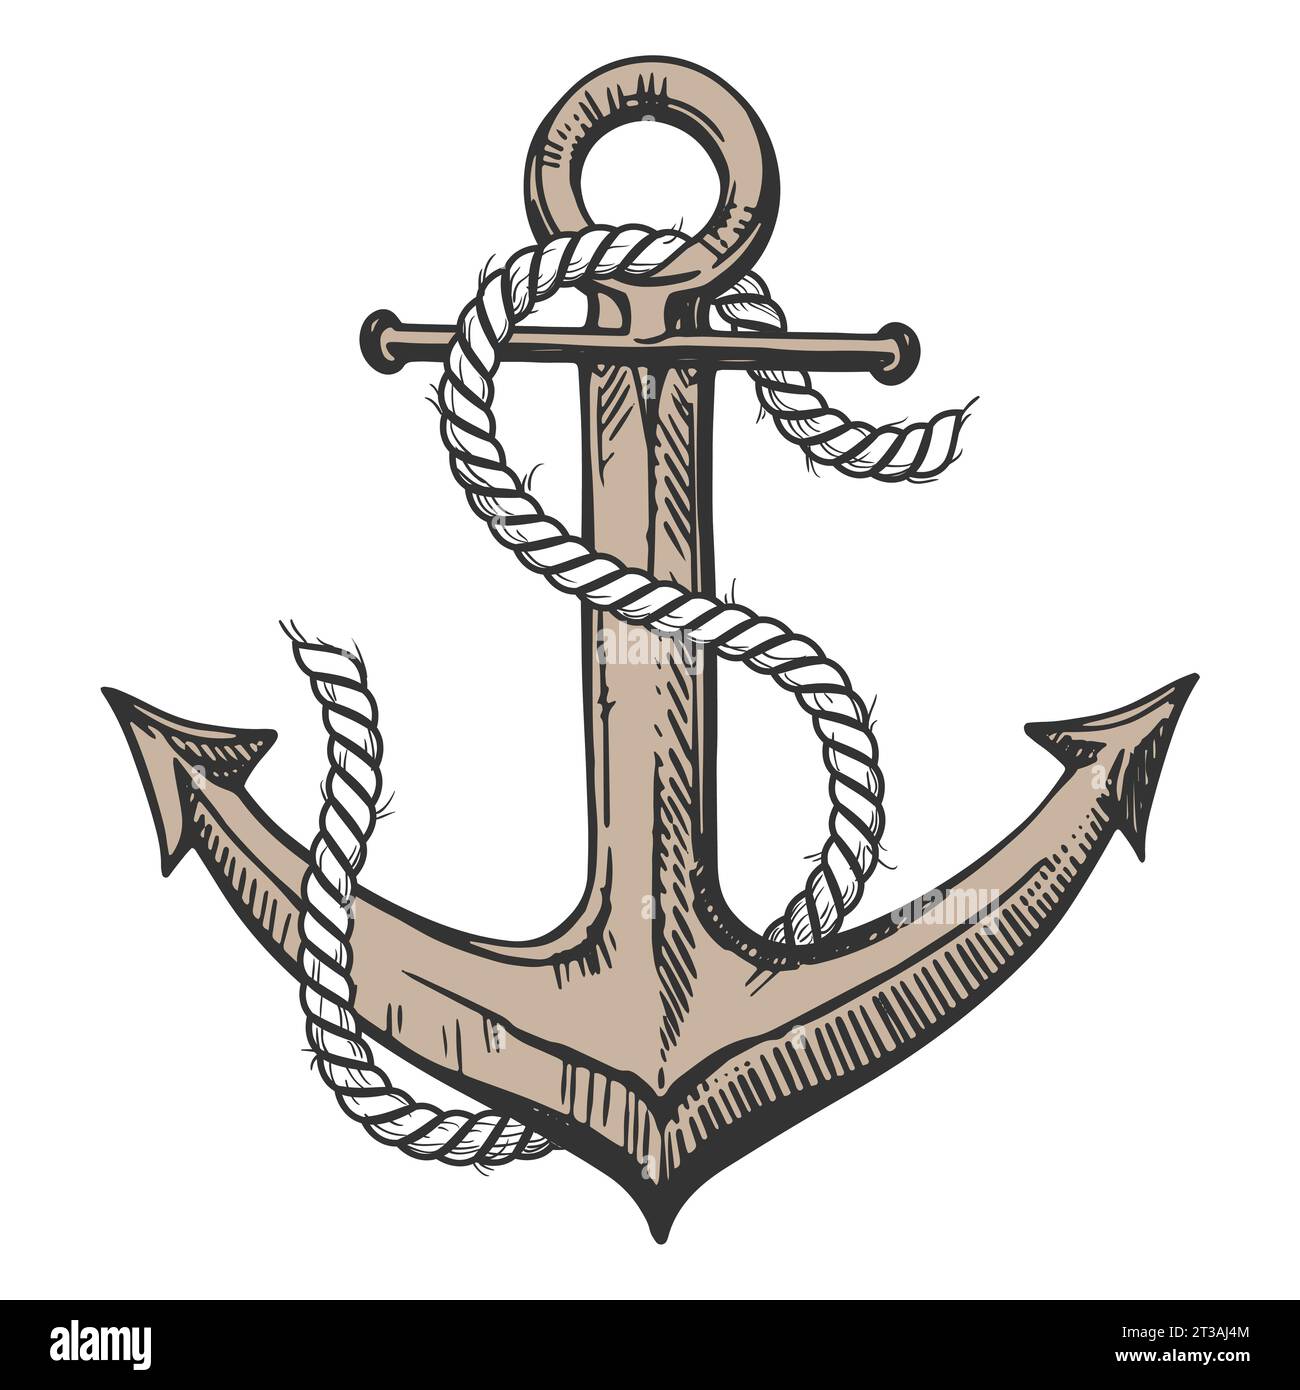 Anchor outline icon isolated clip art Royalty Free Vector